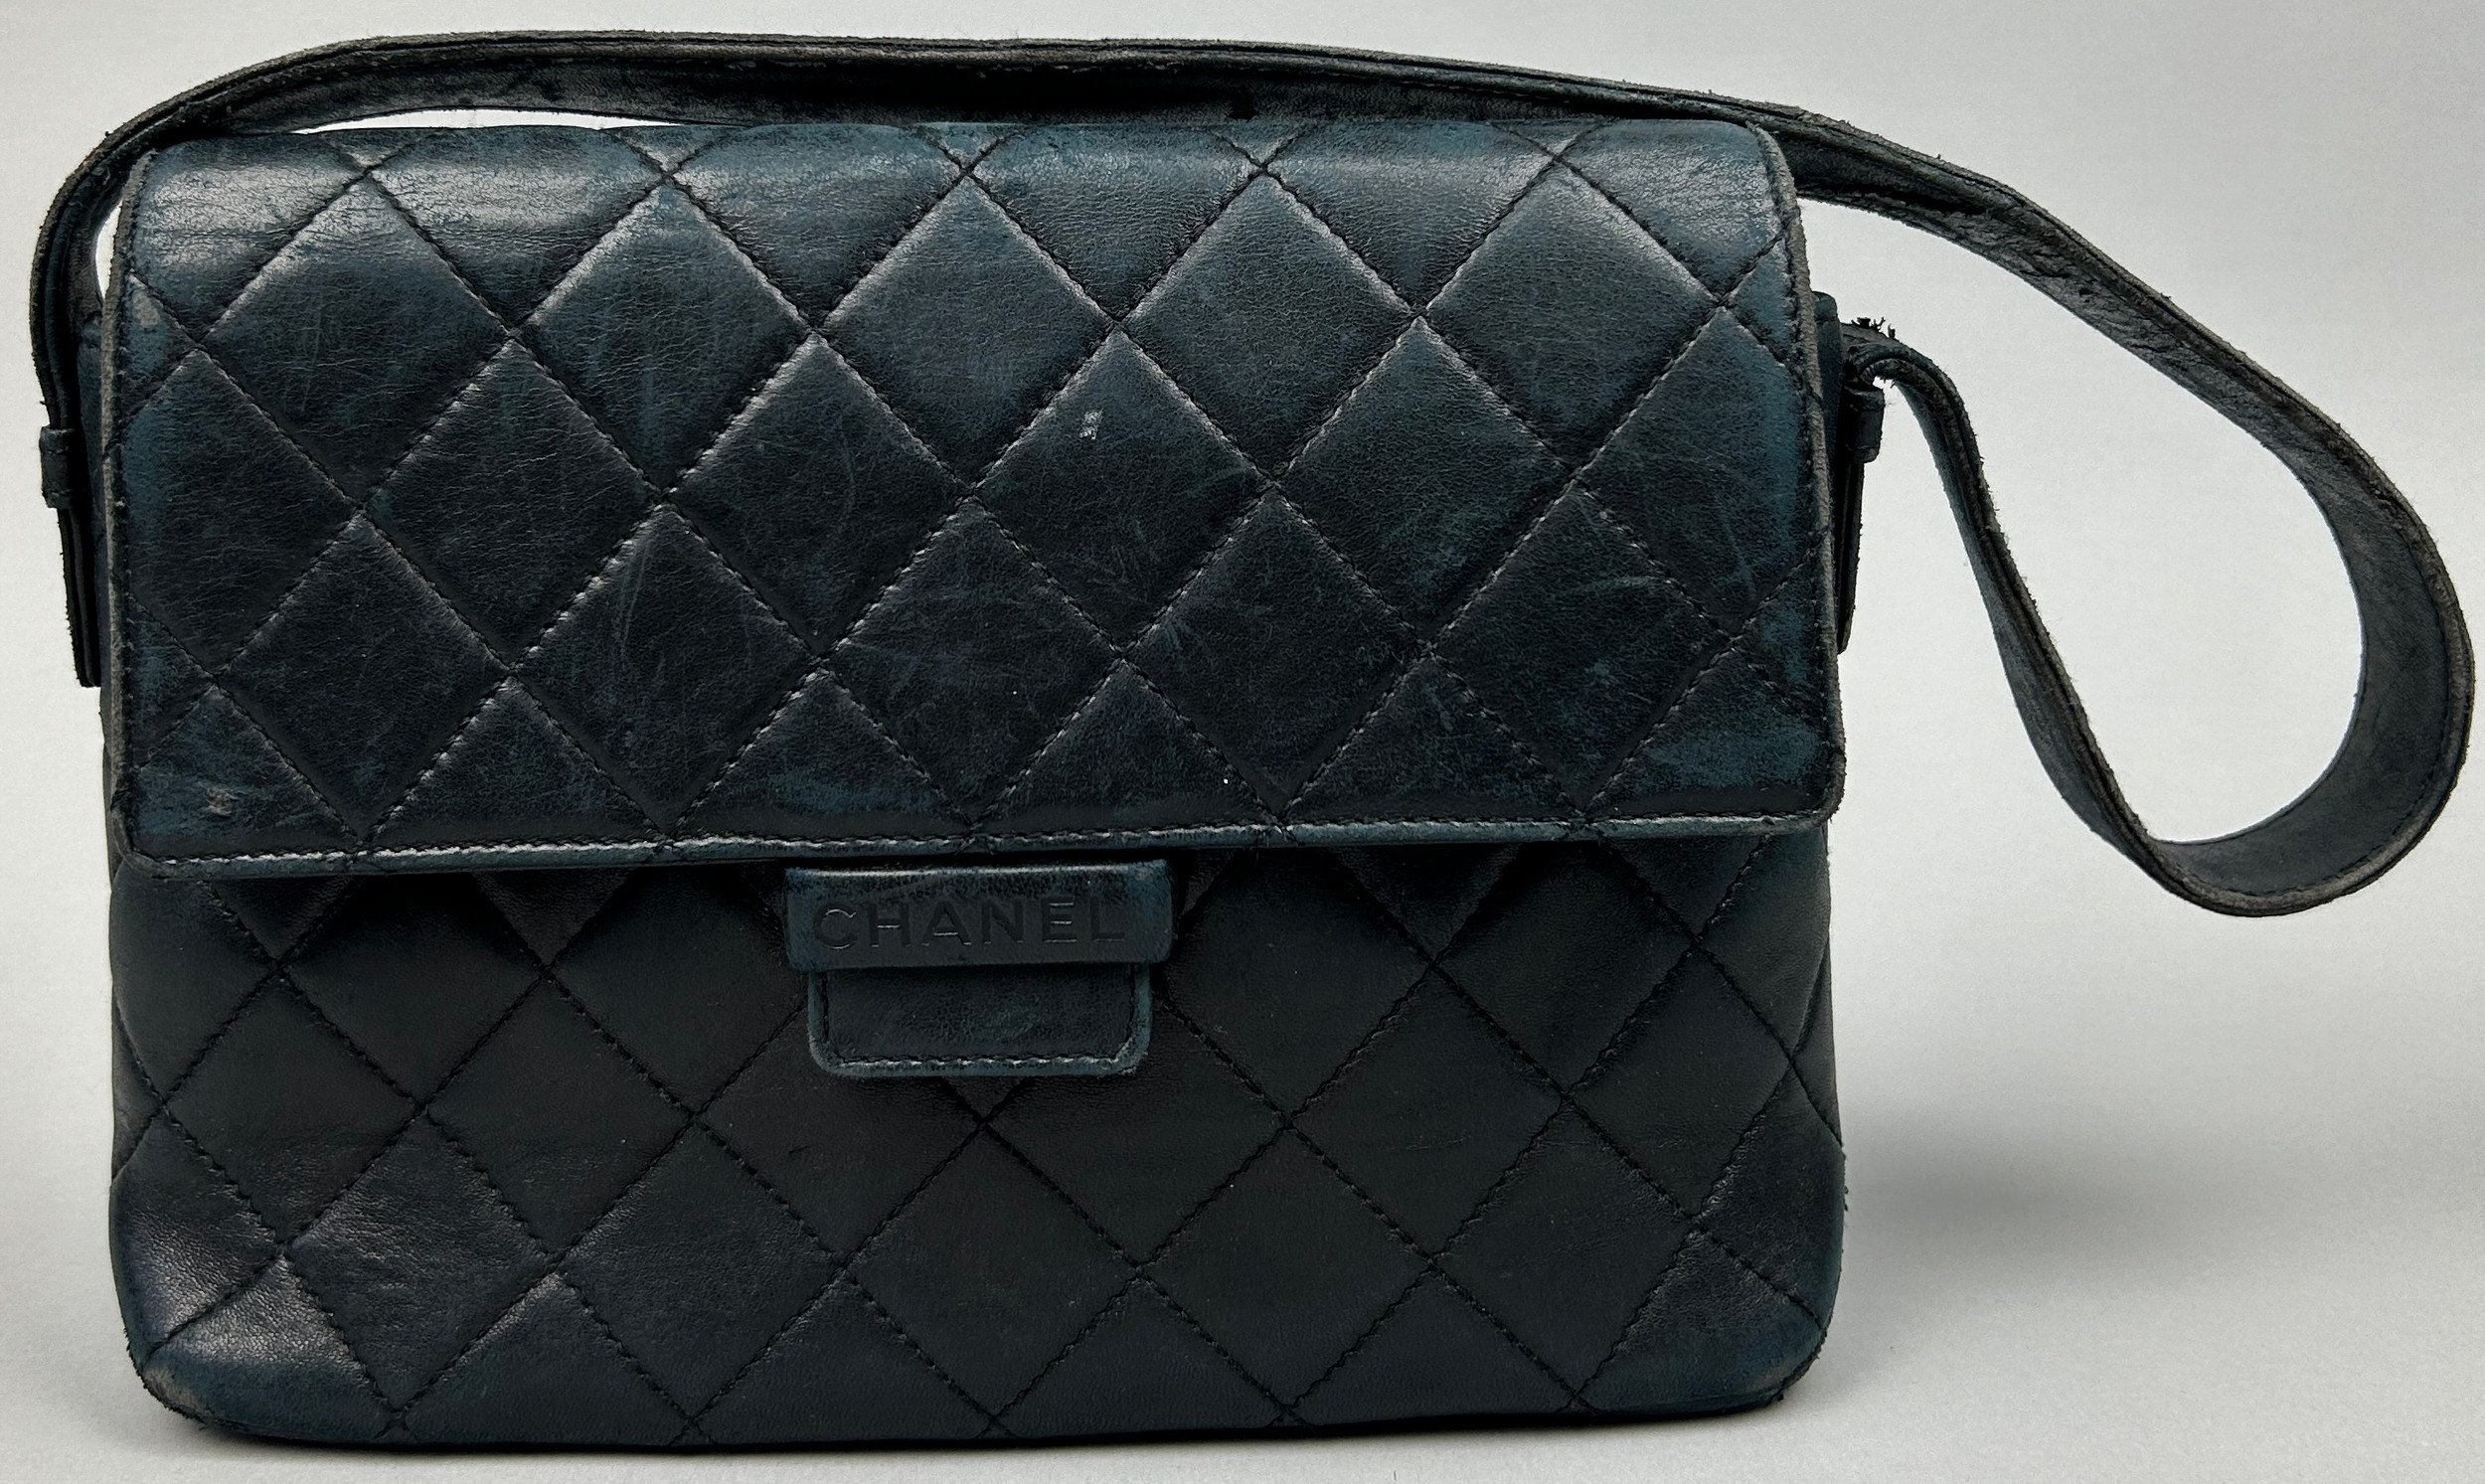 A CHANEL NAVY BLUE LEATHER QUILTED HANDBAG, with certificate of authenticity serial 10218184 and